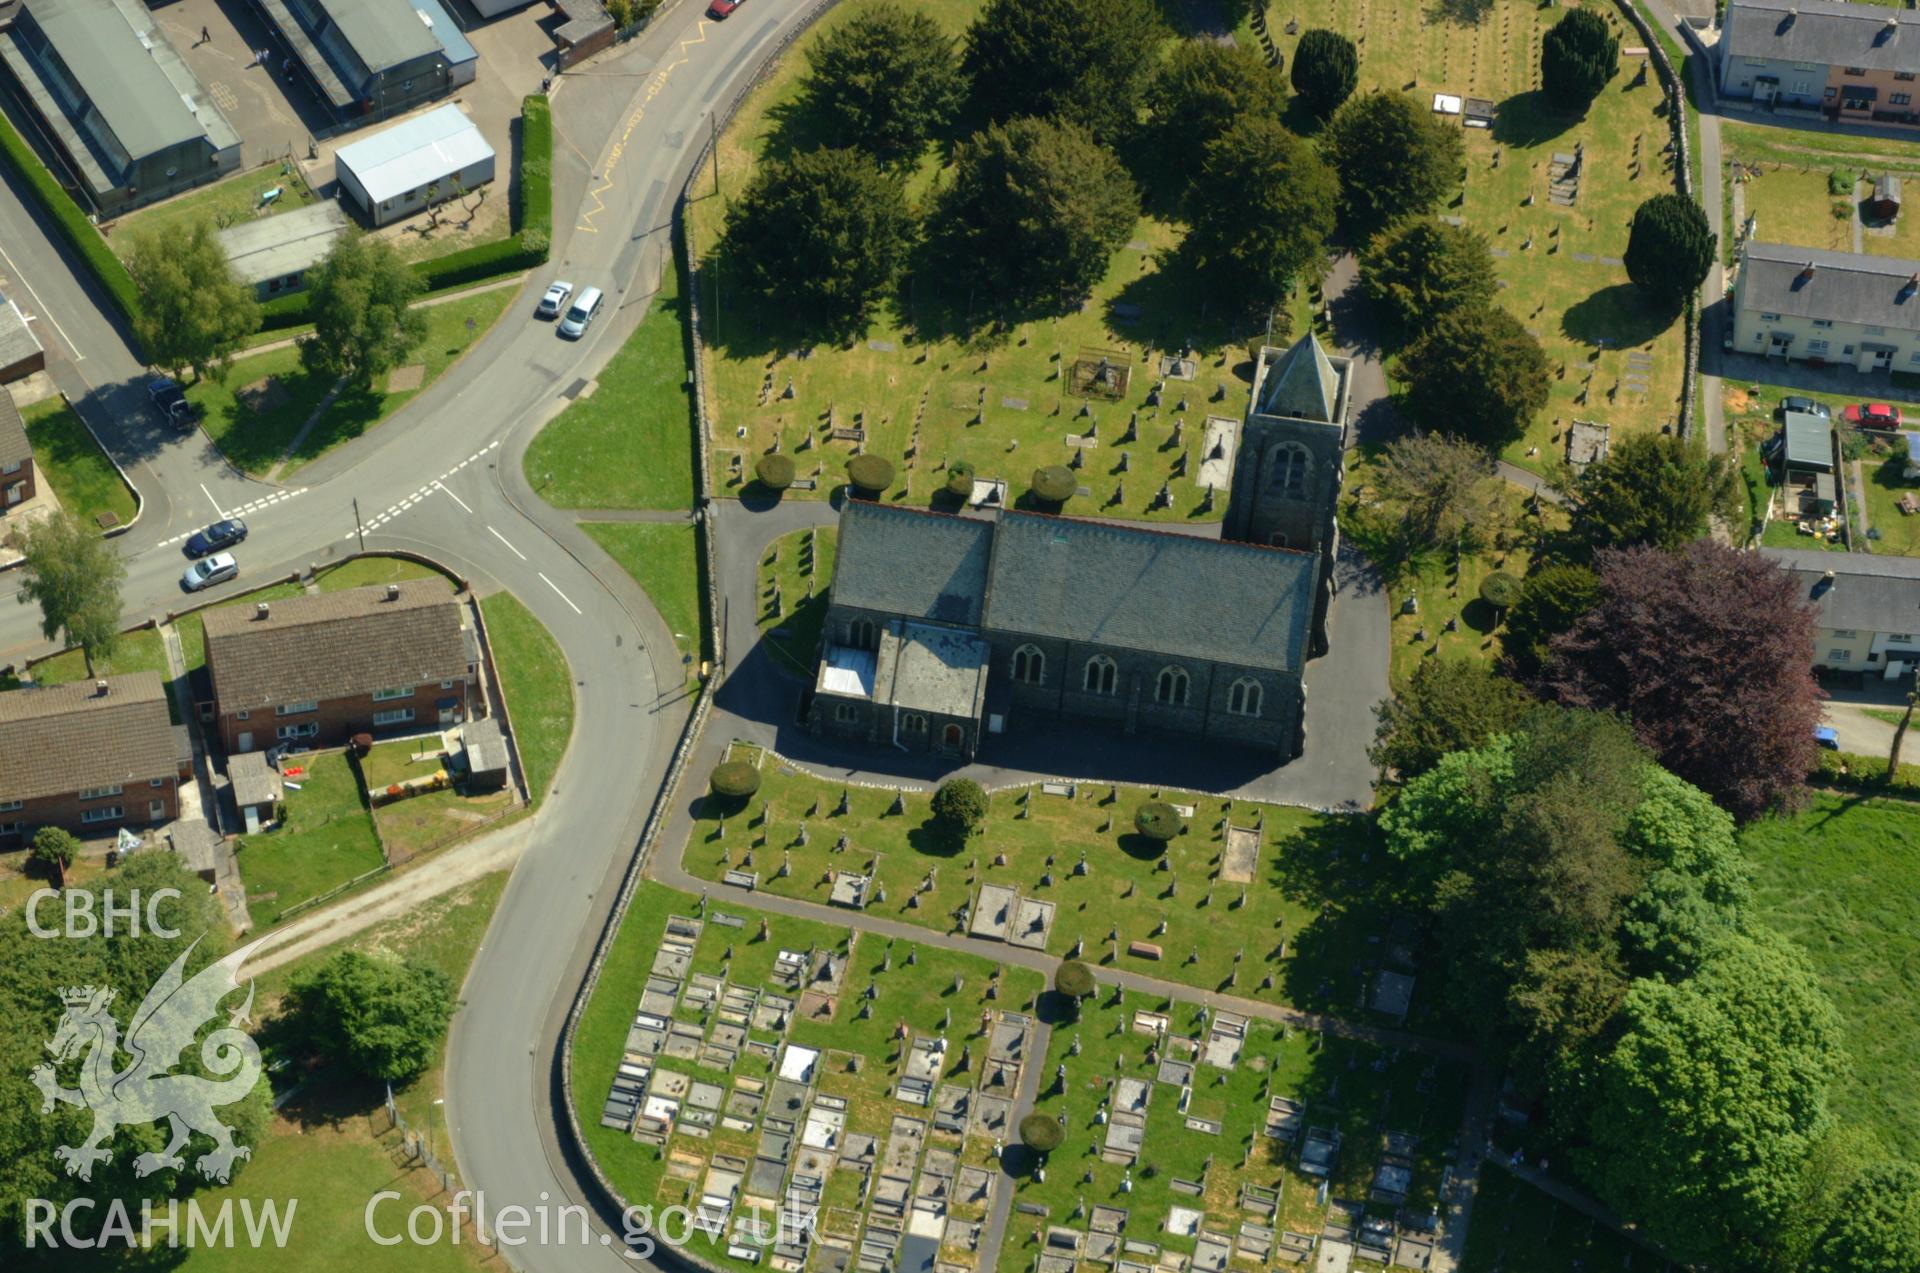 RCAHMW colour oblique aerial photograph of St Peter's Church, Lampeter taken on 24/05/2004 by Toby Driver